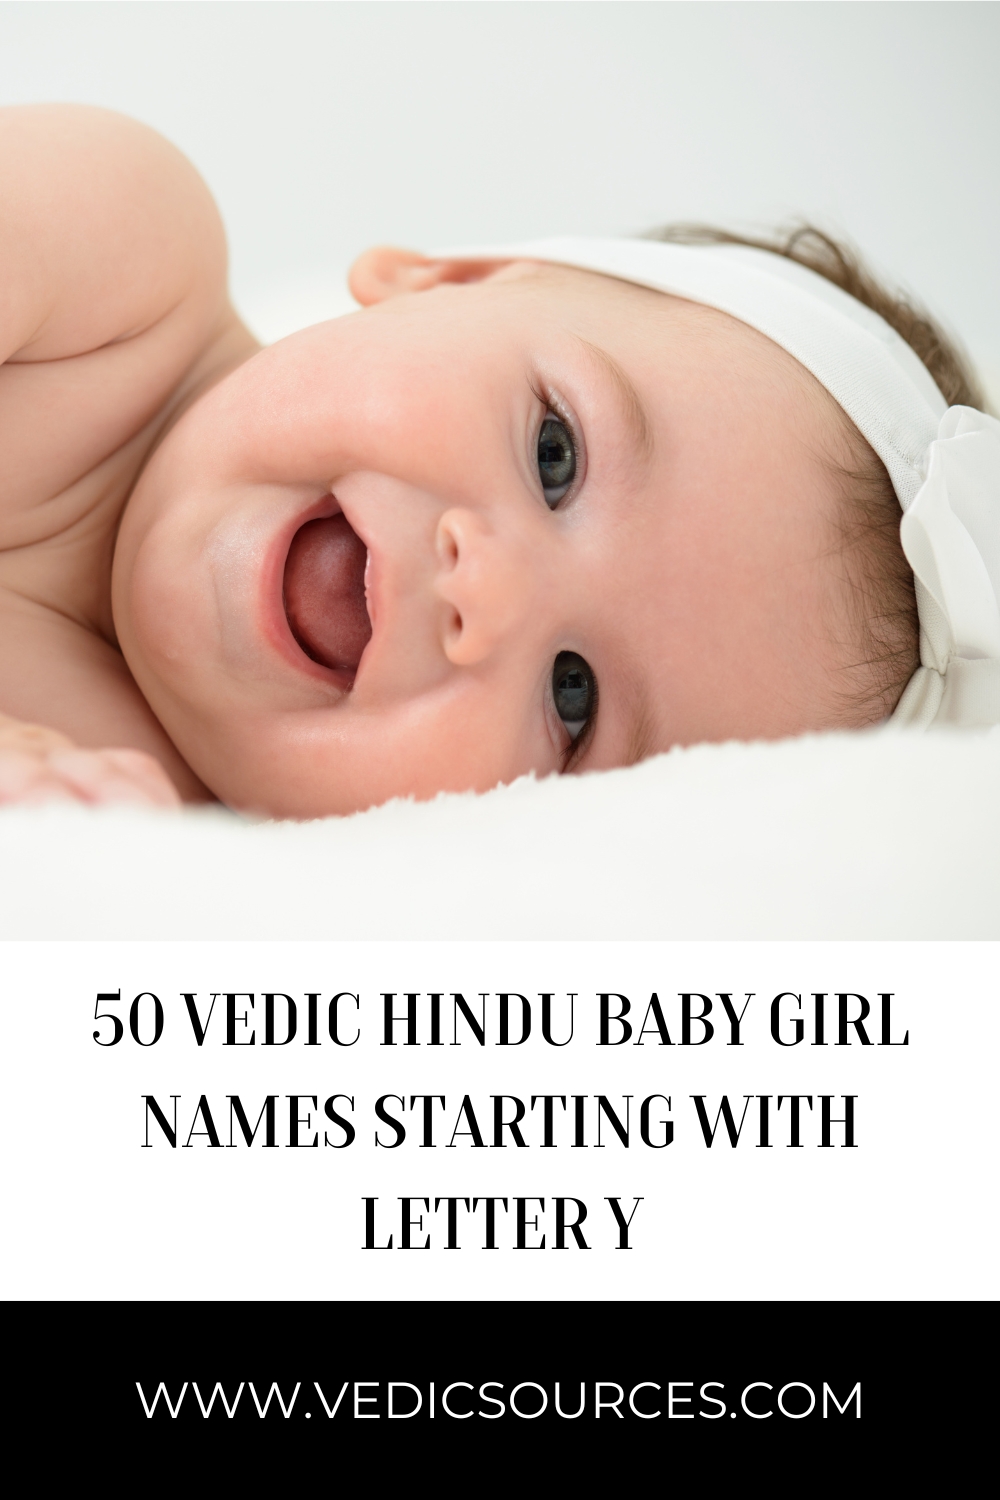 50 Vedic Hindu Baby Girl Names Starting with Letter Y